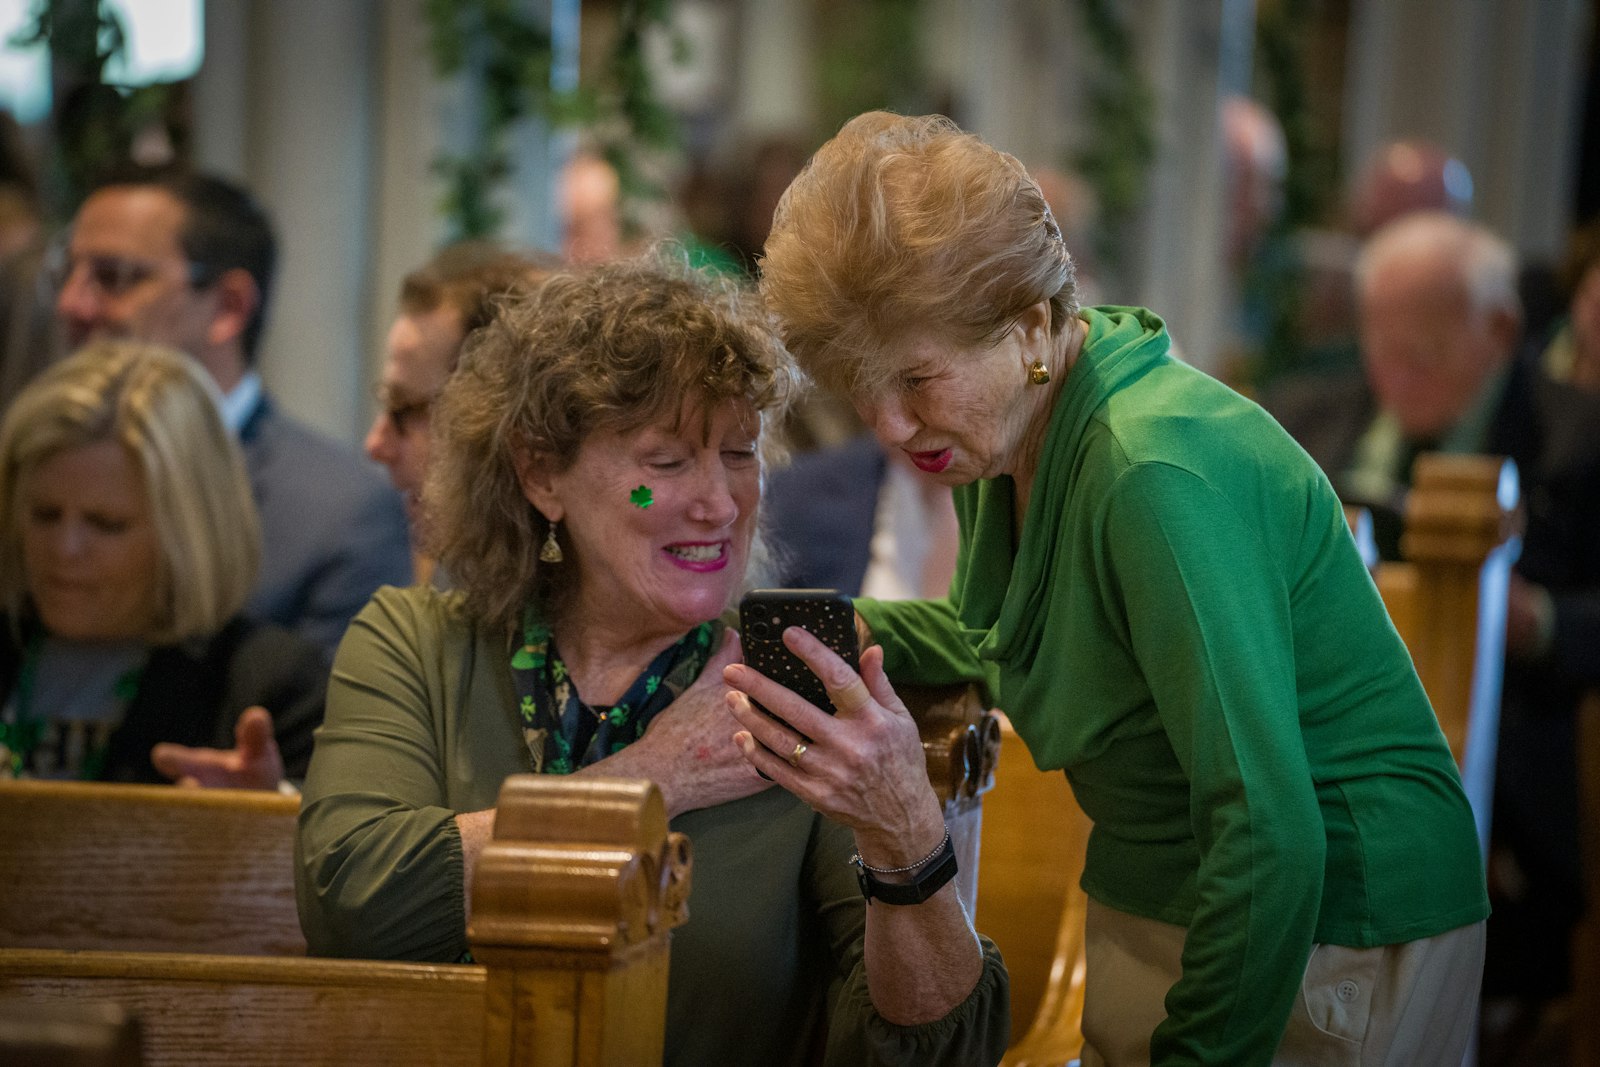 Congregants, decked out in green, fill the pews at Most Holy Trinity Parish on March 17. After two years of subdues celebrations because of the COVID-19 pandemic, this year's celebration featured most of the usual trappings of St. Patrick's Day at the historic Corktown parish.